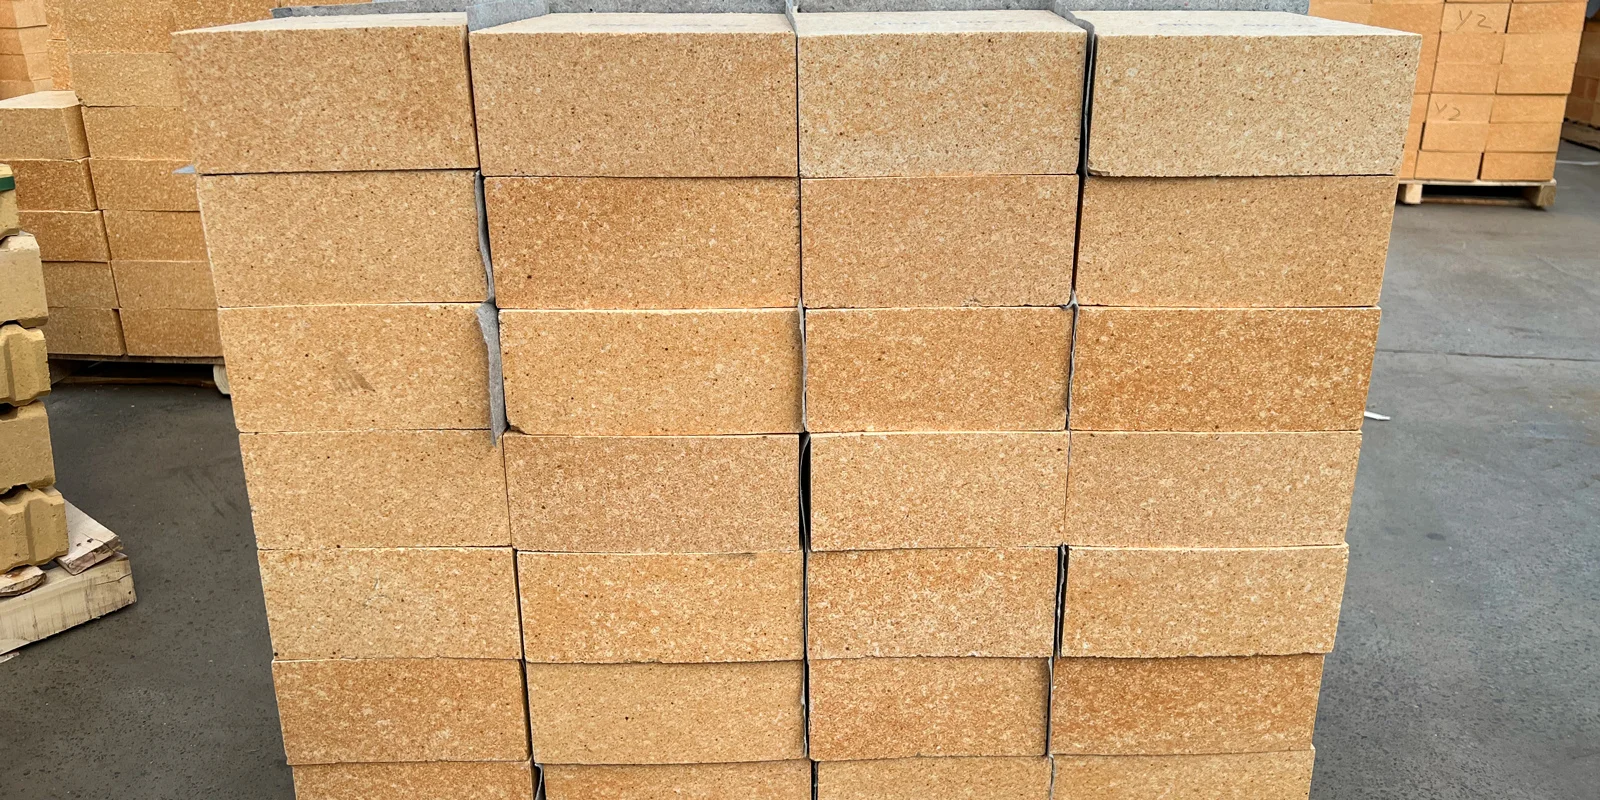 Successful Delivery of Kerui Andalusite Bricks to Russia